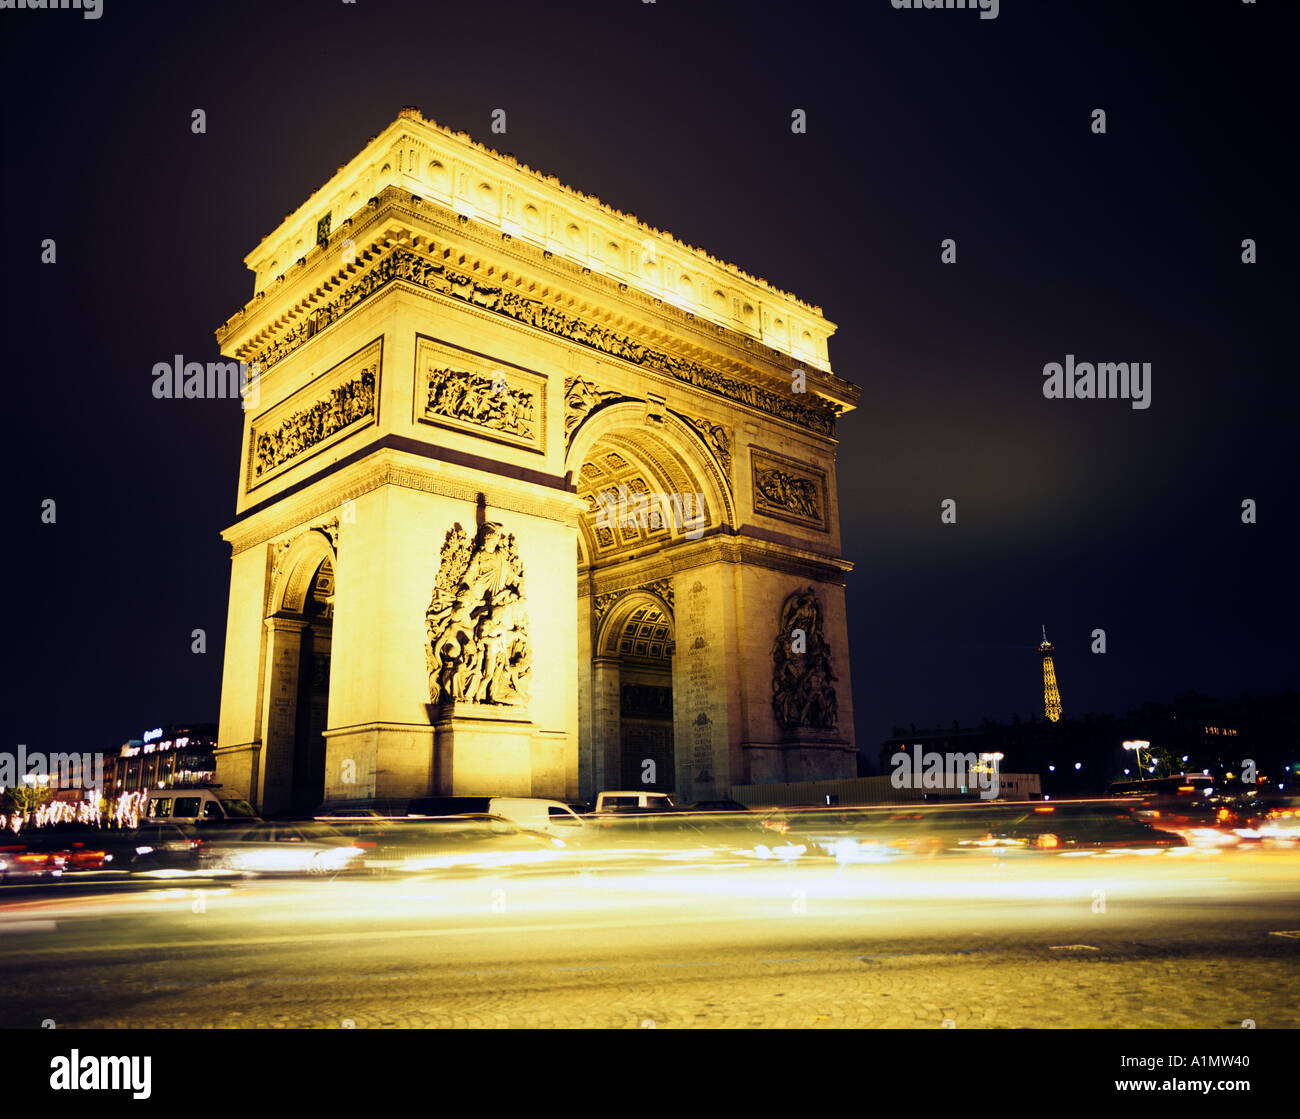 A night view of the Arc de Triomphe in Paris France Stock Photo